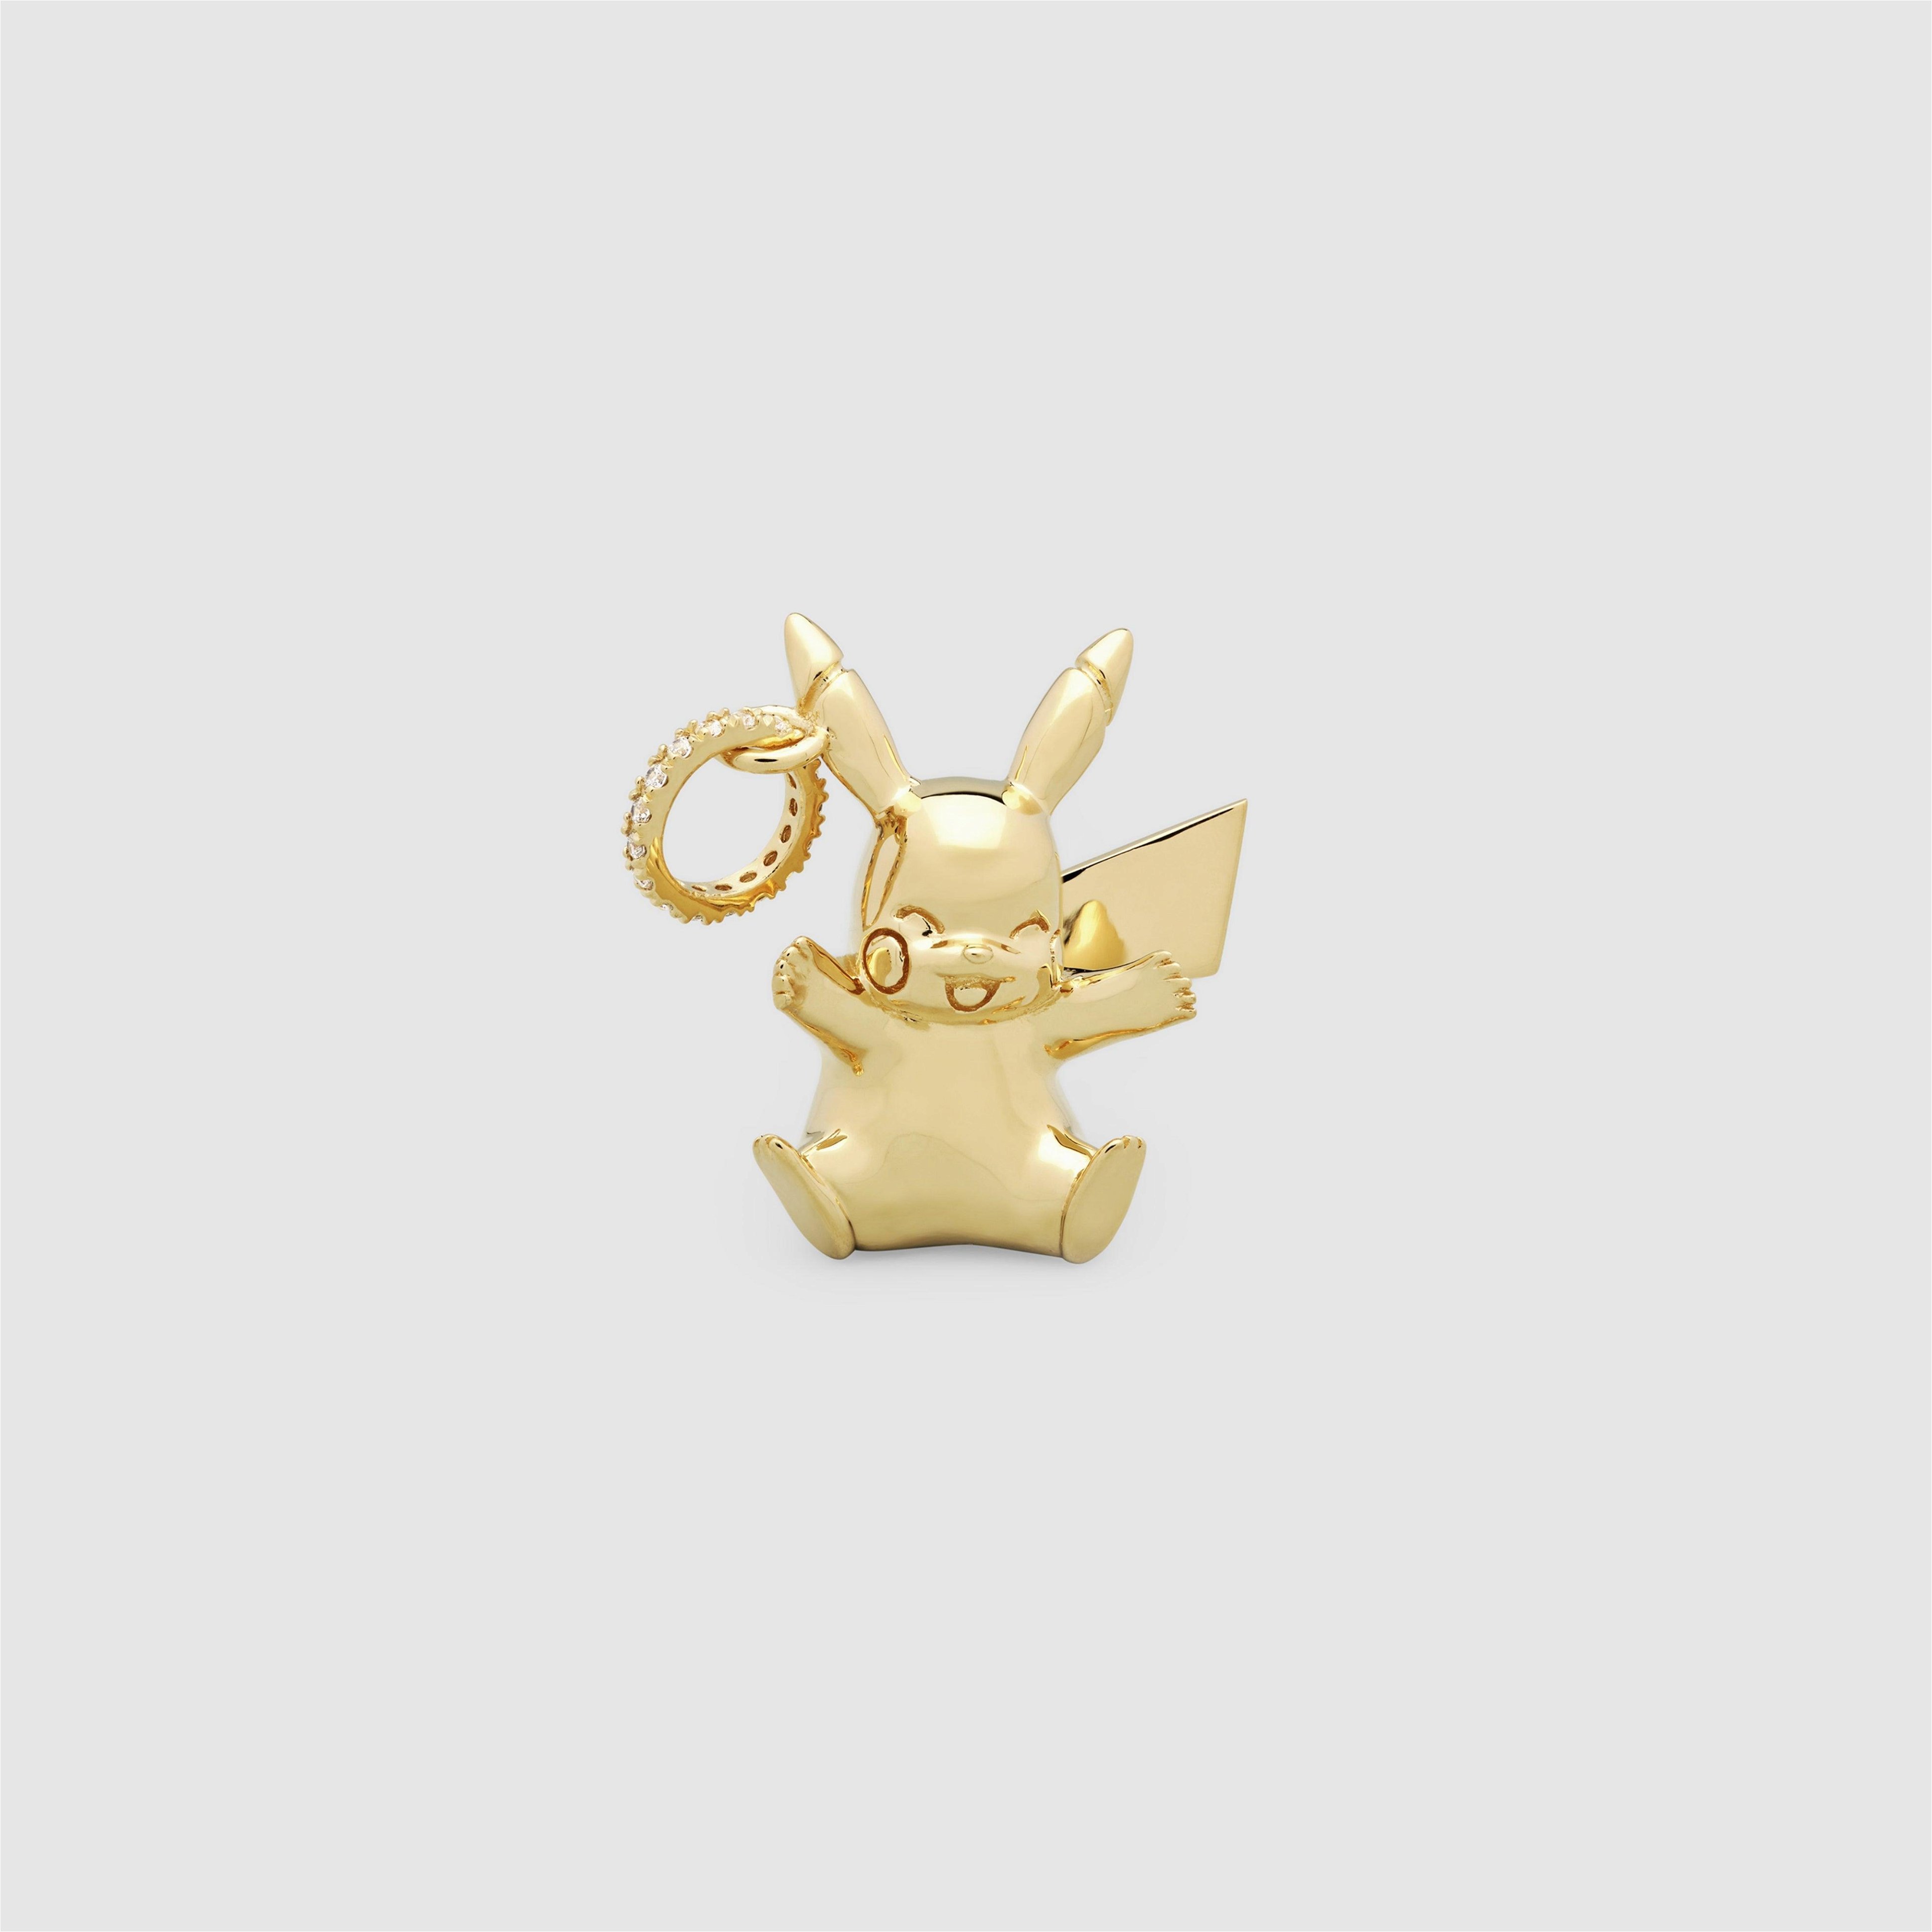 TOM WOOD - Pikachu Happy Gold Charm - (Yellow Gold) by TOM WOOD